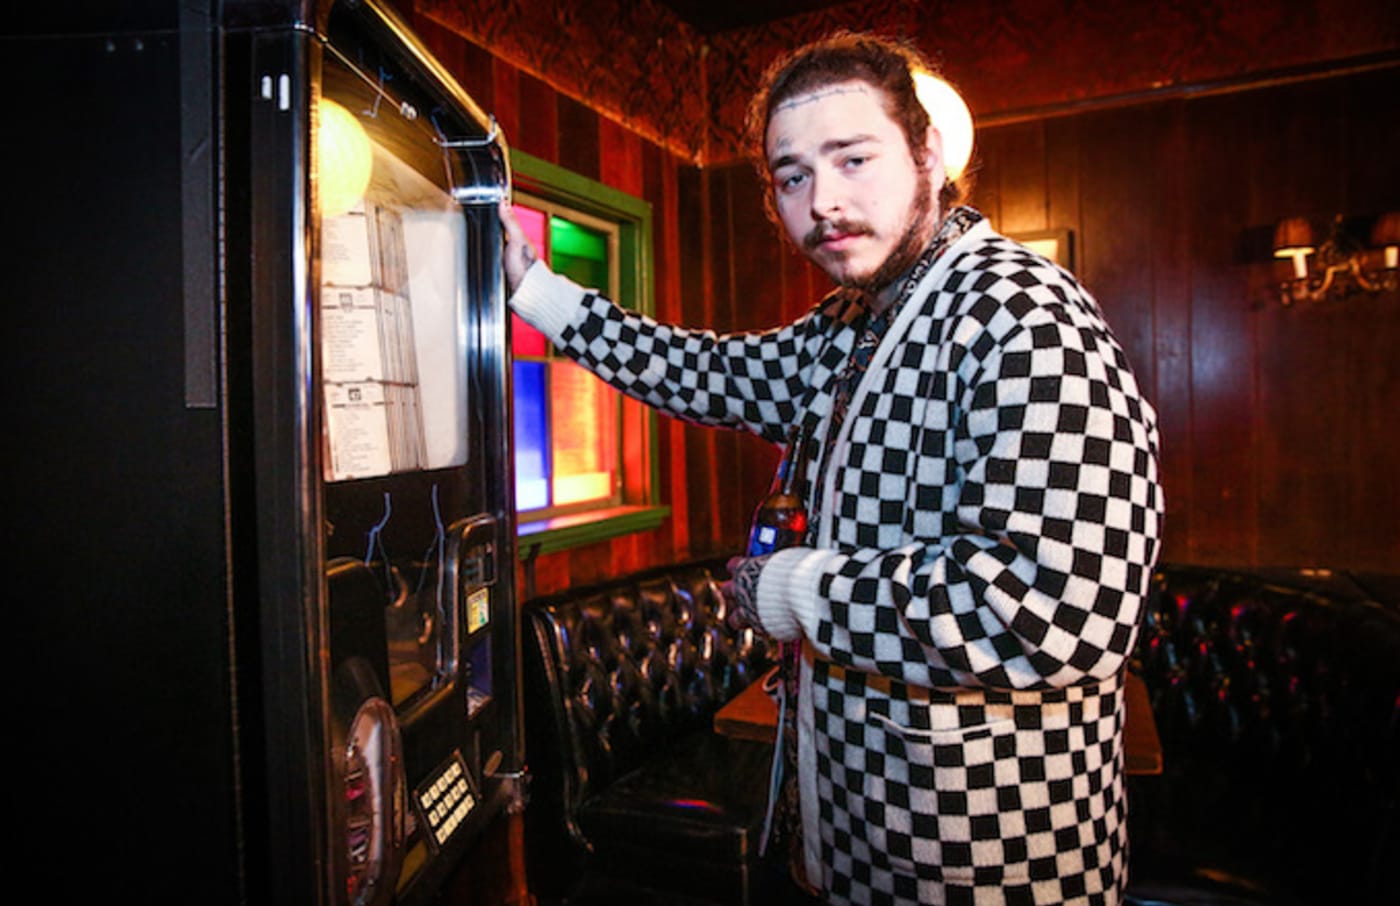 Post Malone behind the scenes before his Bud Light Dive Bar Tour show in Nashville.